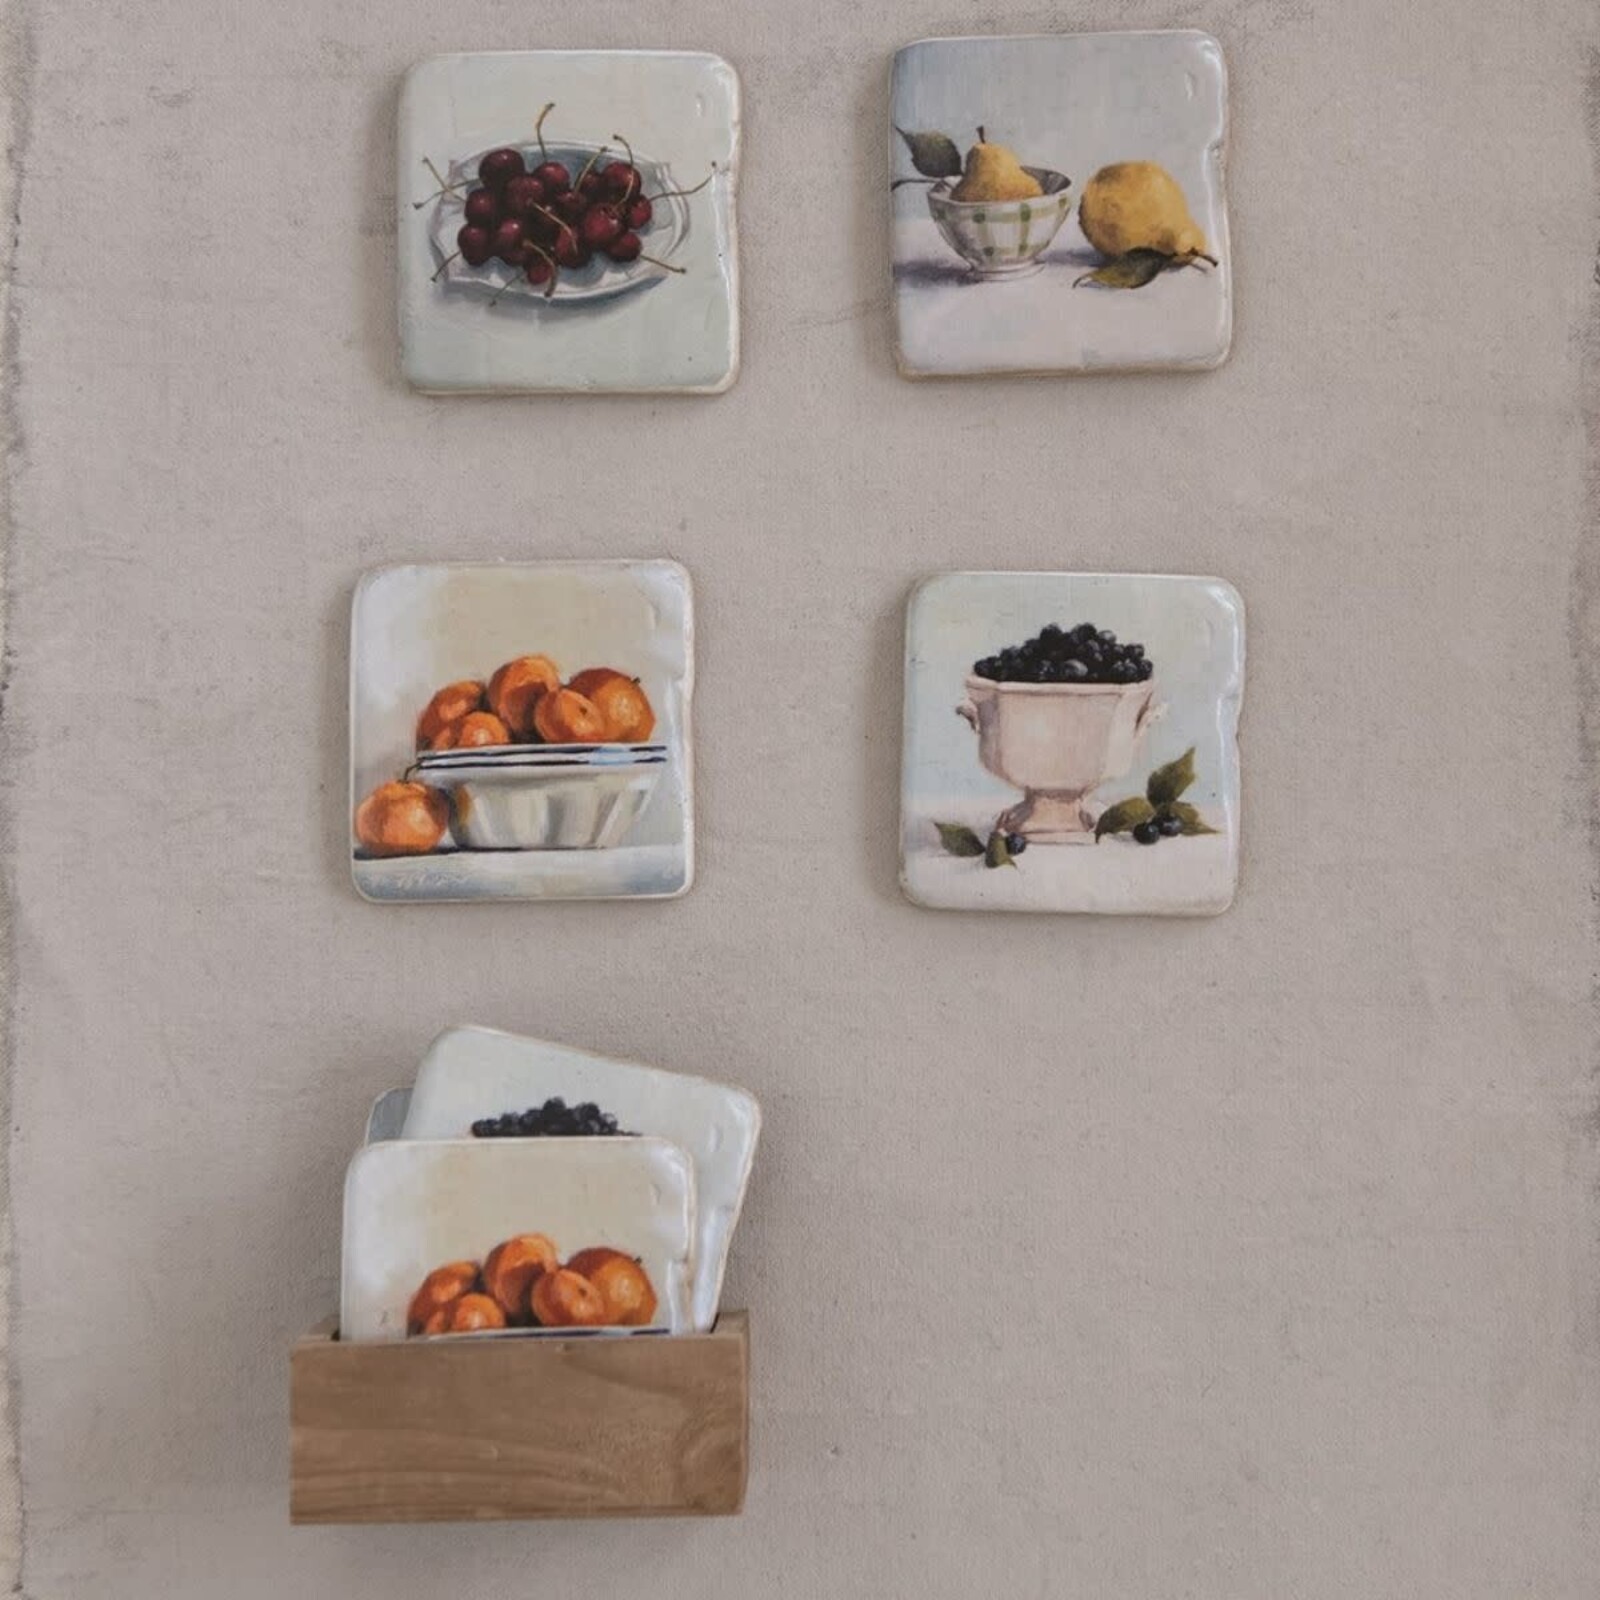 Creative Co-Op 3.75" Square Resin Coasters in Wood Box with Fruit, Set of 5   DF3401 loading=